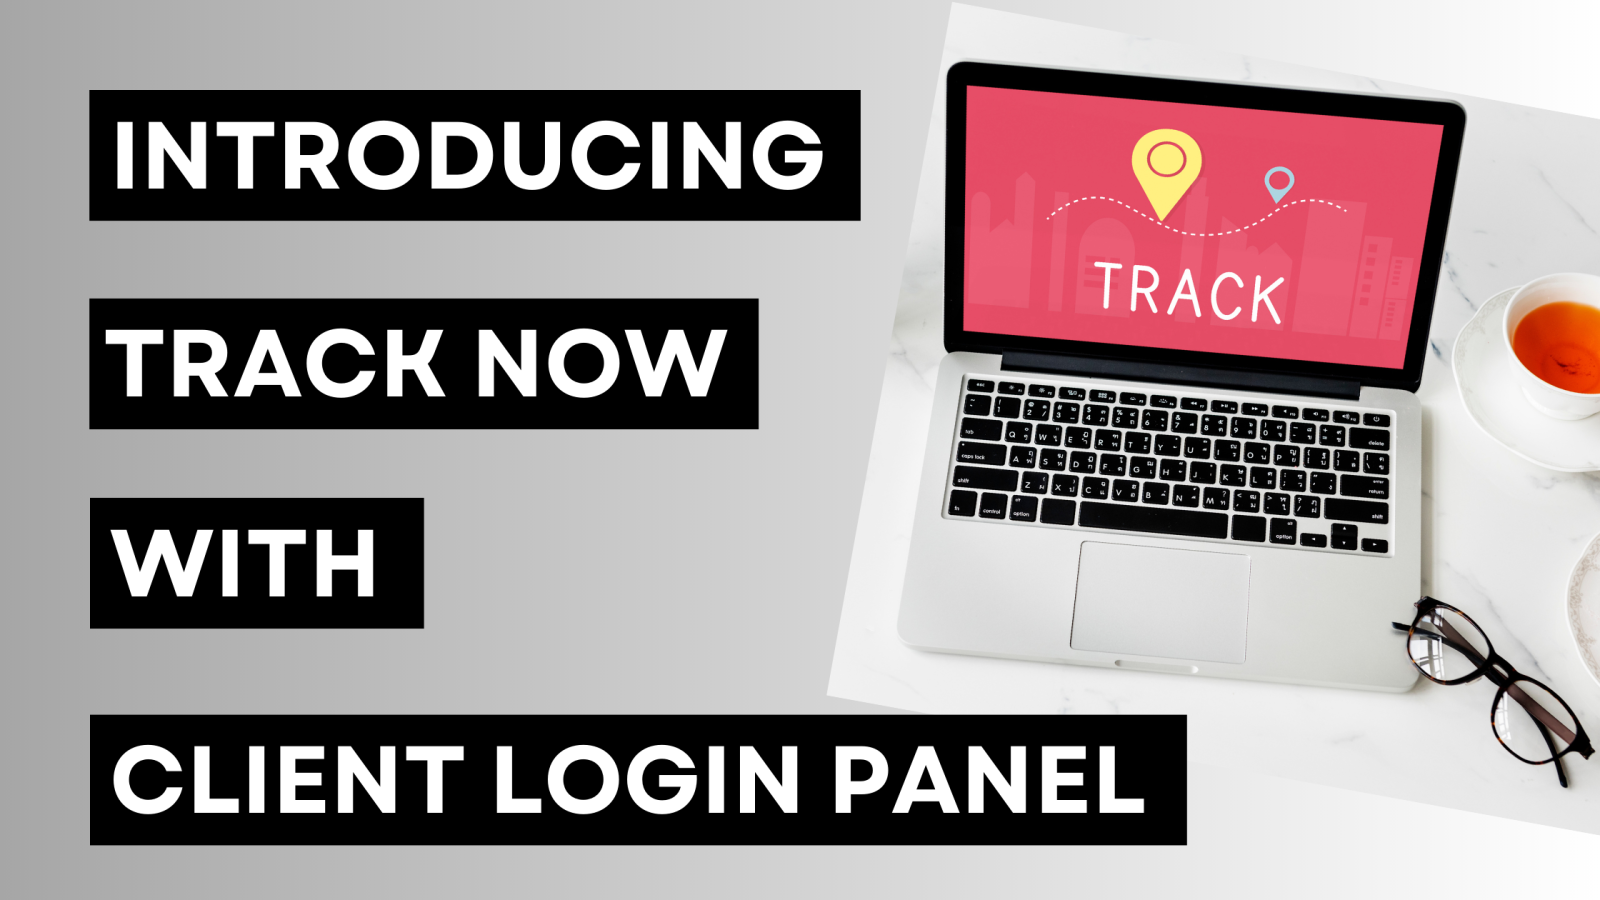 empowering-your-camouflageclicks-experience:-introducing-track-now-with-client-login-panel